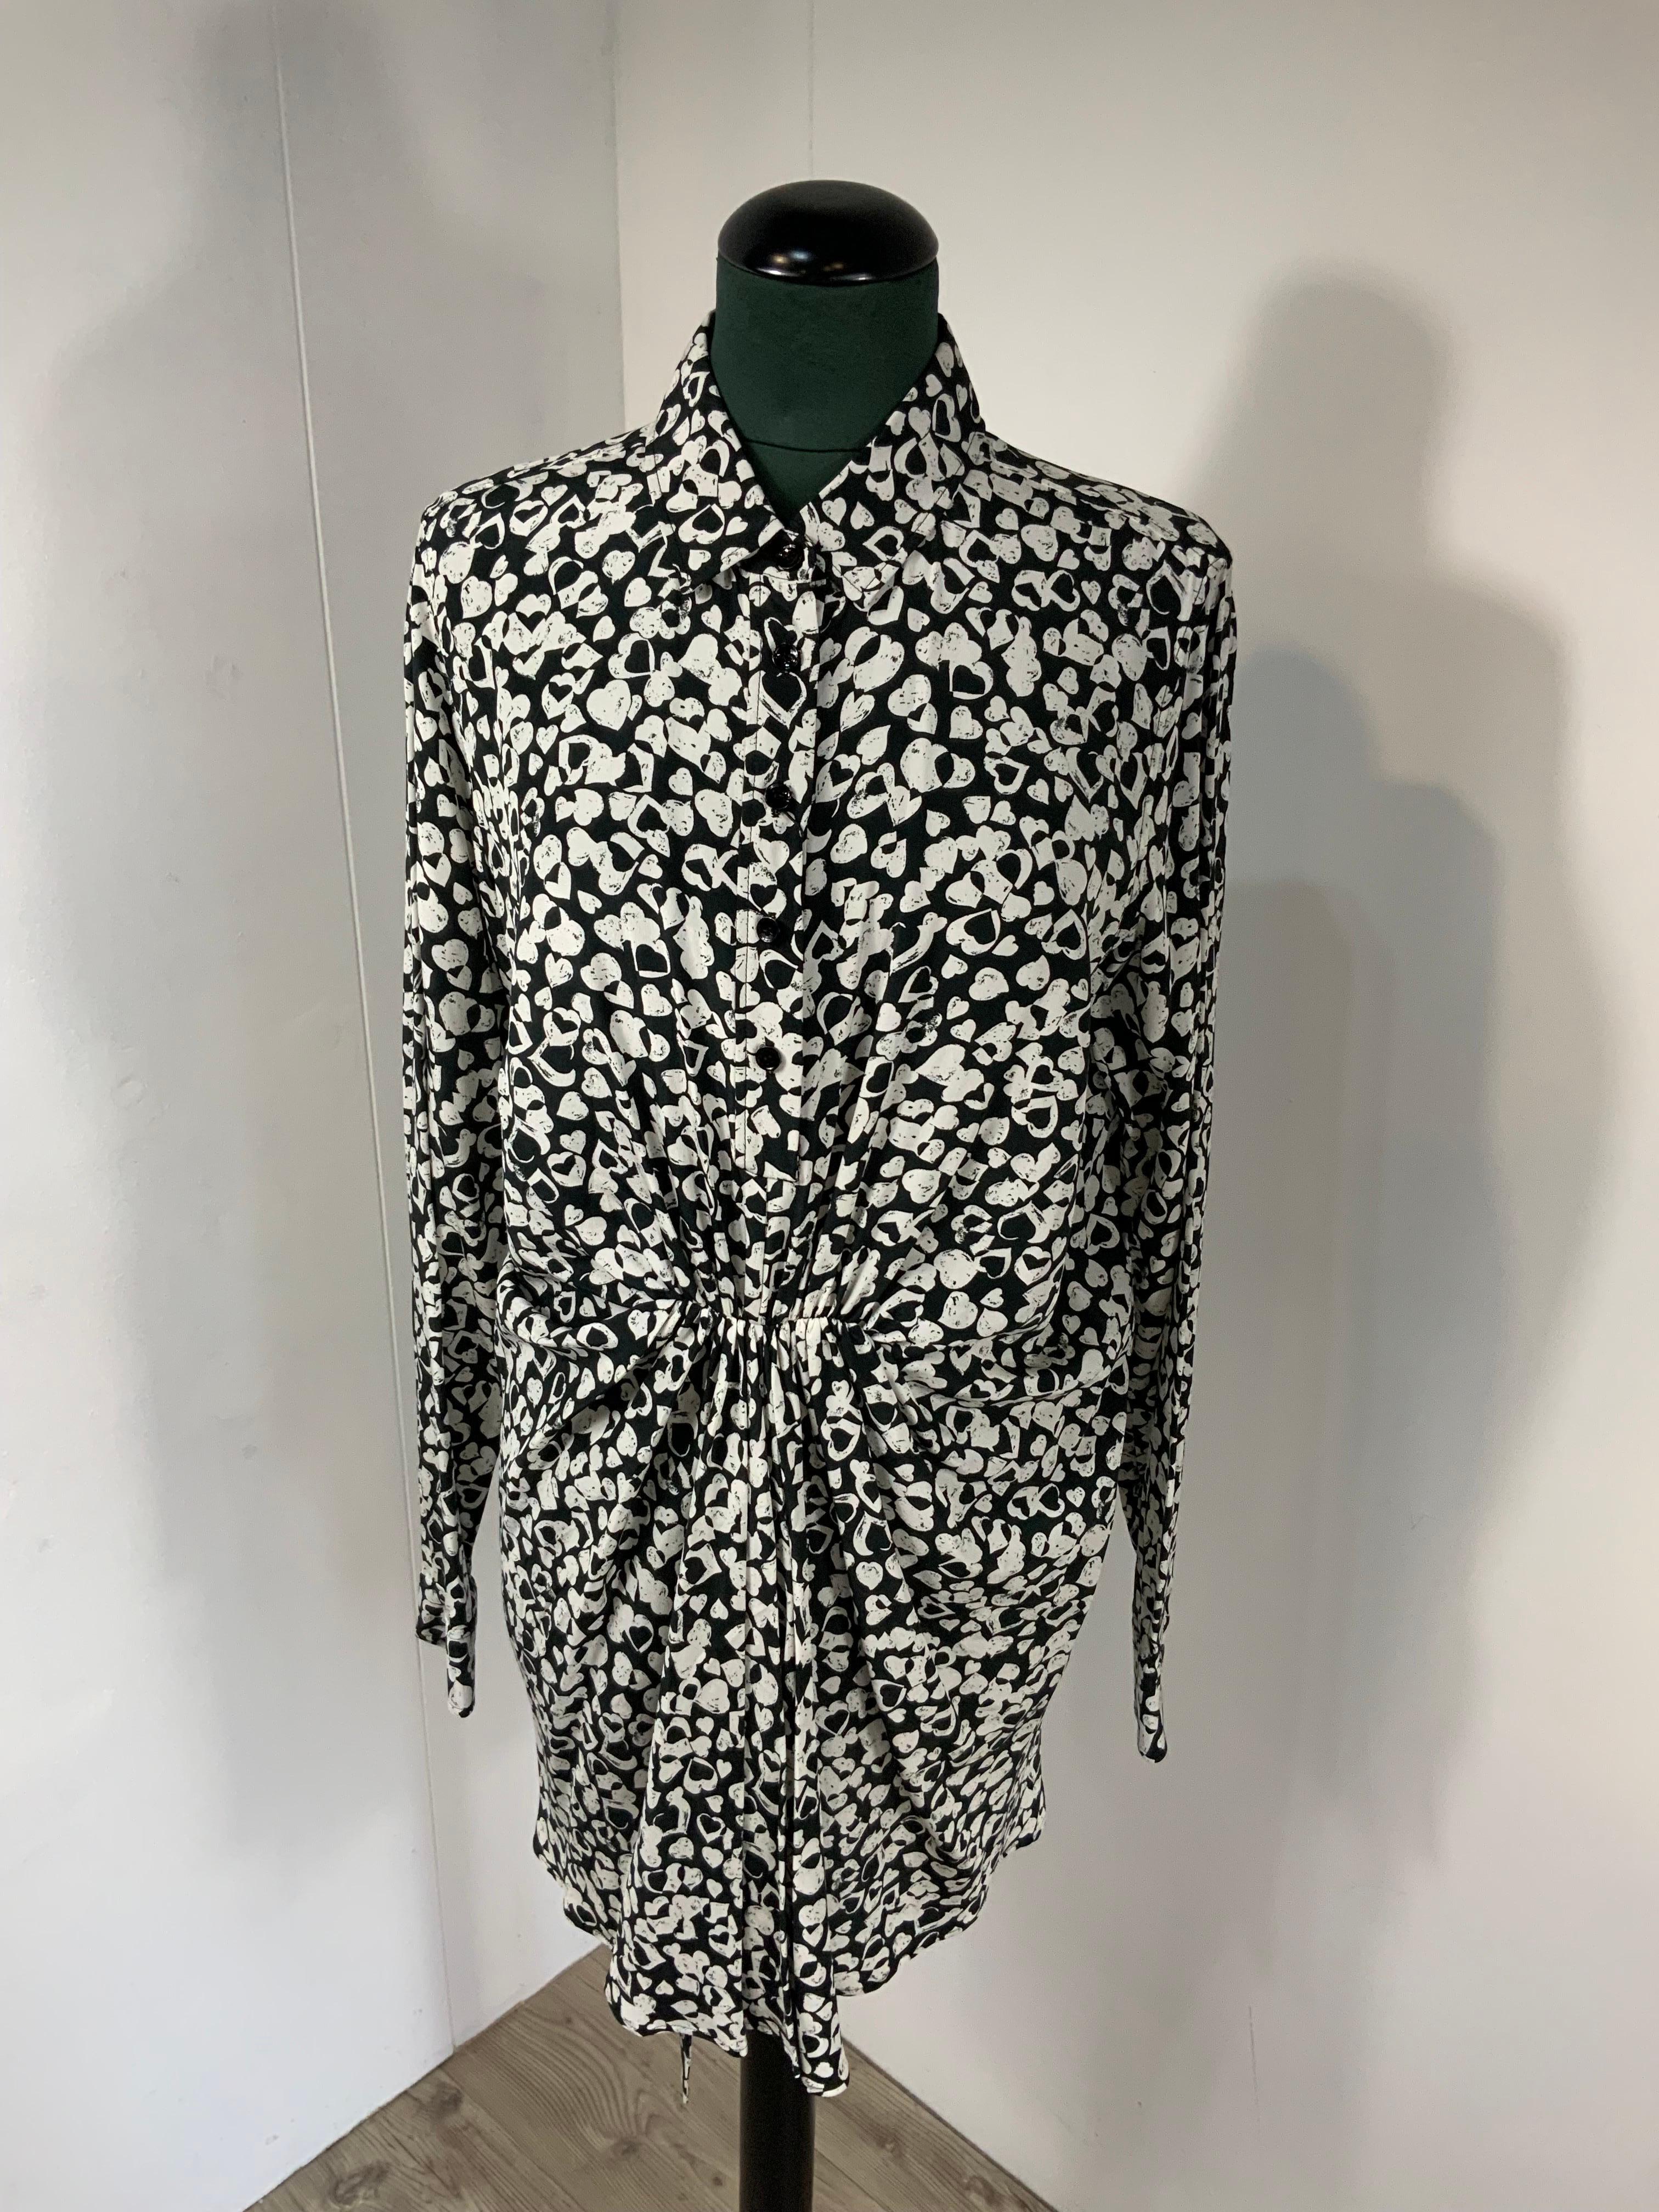 SAINT LAURENT DRESS.
2017 Ready to Wear.
In silk. Heart fantasy.
The size is not indicated but it fits an Italian 40/42.
Shoulders 40 cm
Waist 50 cm
Length 93 cm
Sleeve 69 cm
New with tag, never worn.